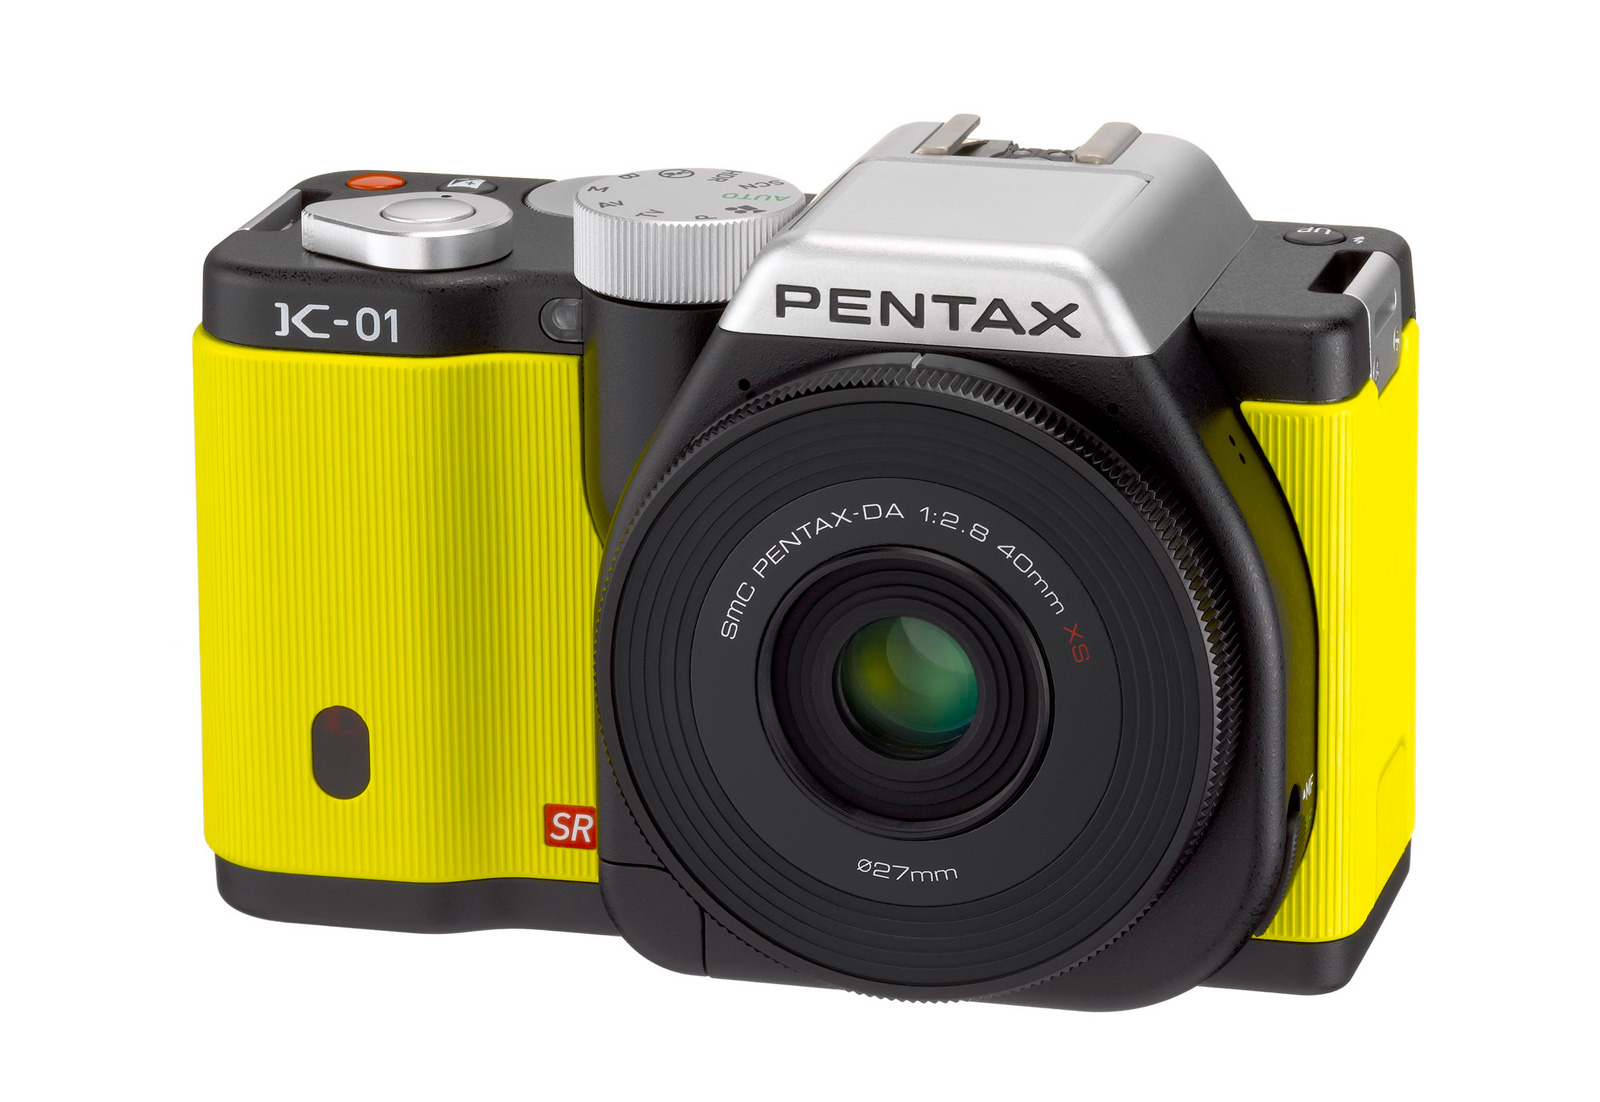 Is the Pentax K-01 designed by Marc Newson any good?